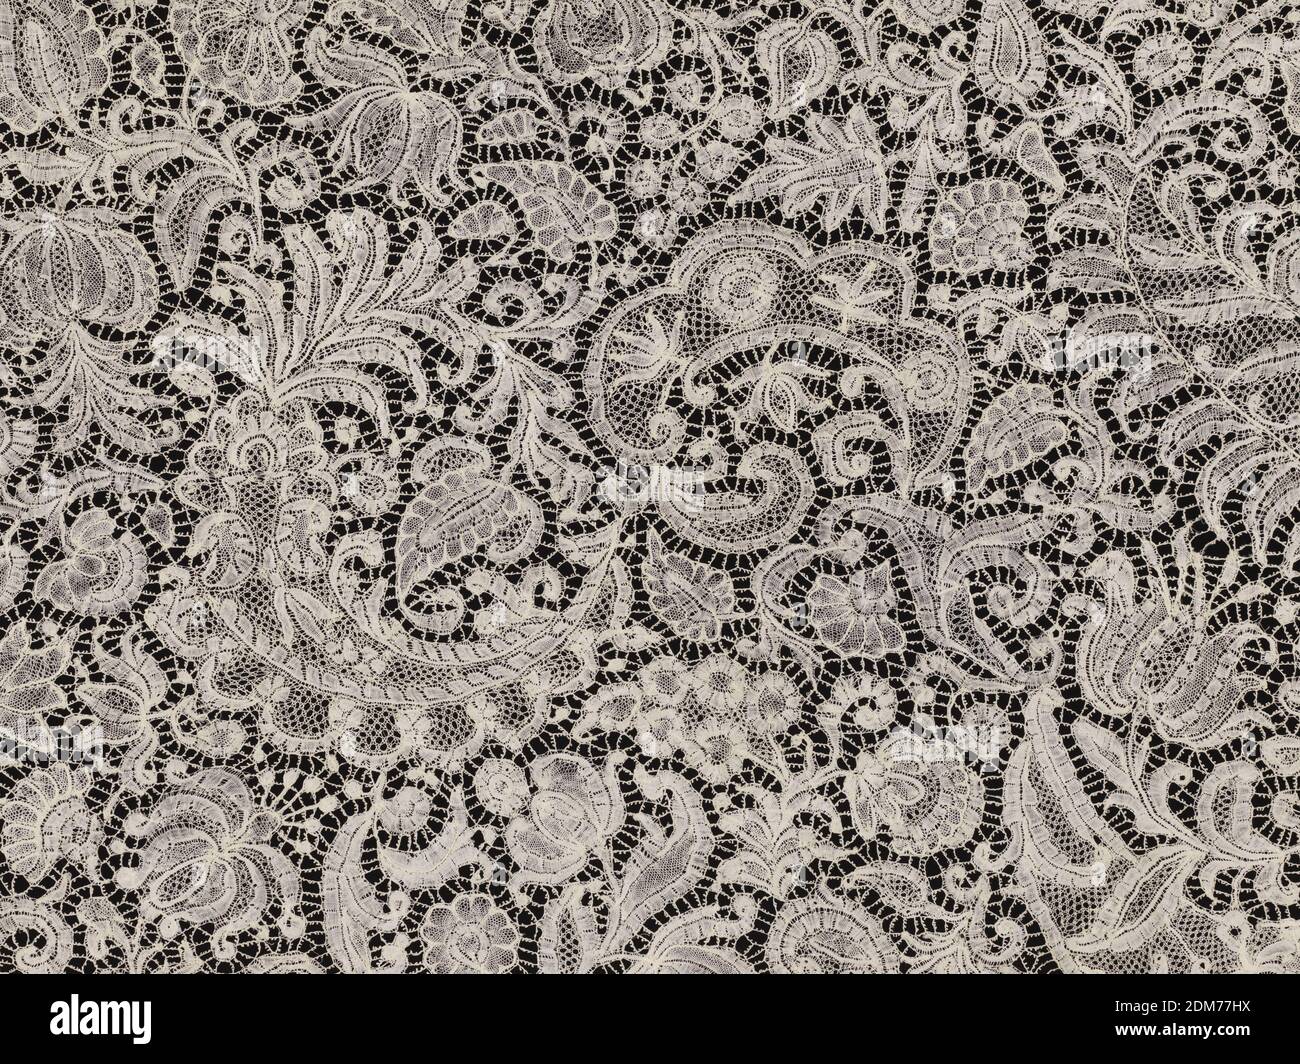 Flounce, Medium: linen Technique: Brussels-style bobbin lace, Flounce worked in an allover design of various types of leaves, terminating in small scrolls and many varieties of flowers., Belgium, 17th century, lace, Flounce Stock Photo